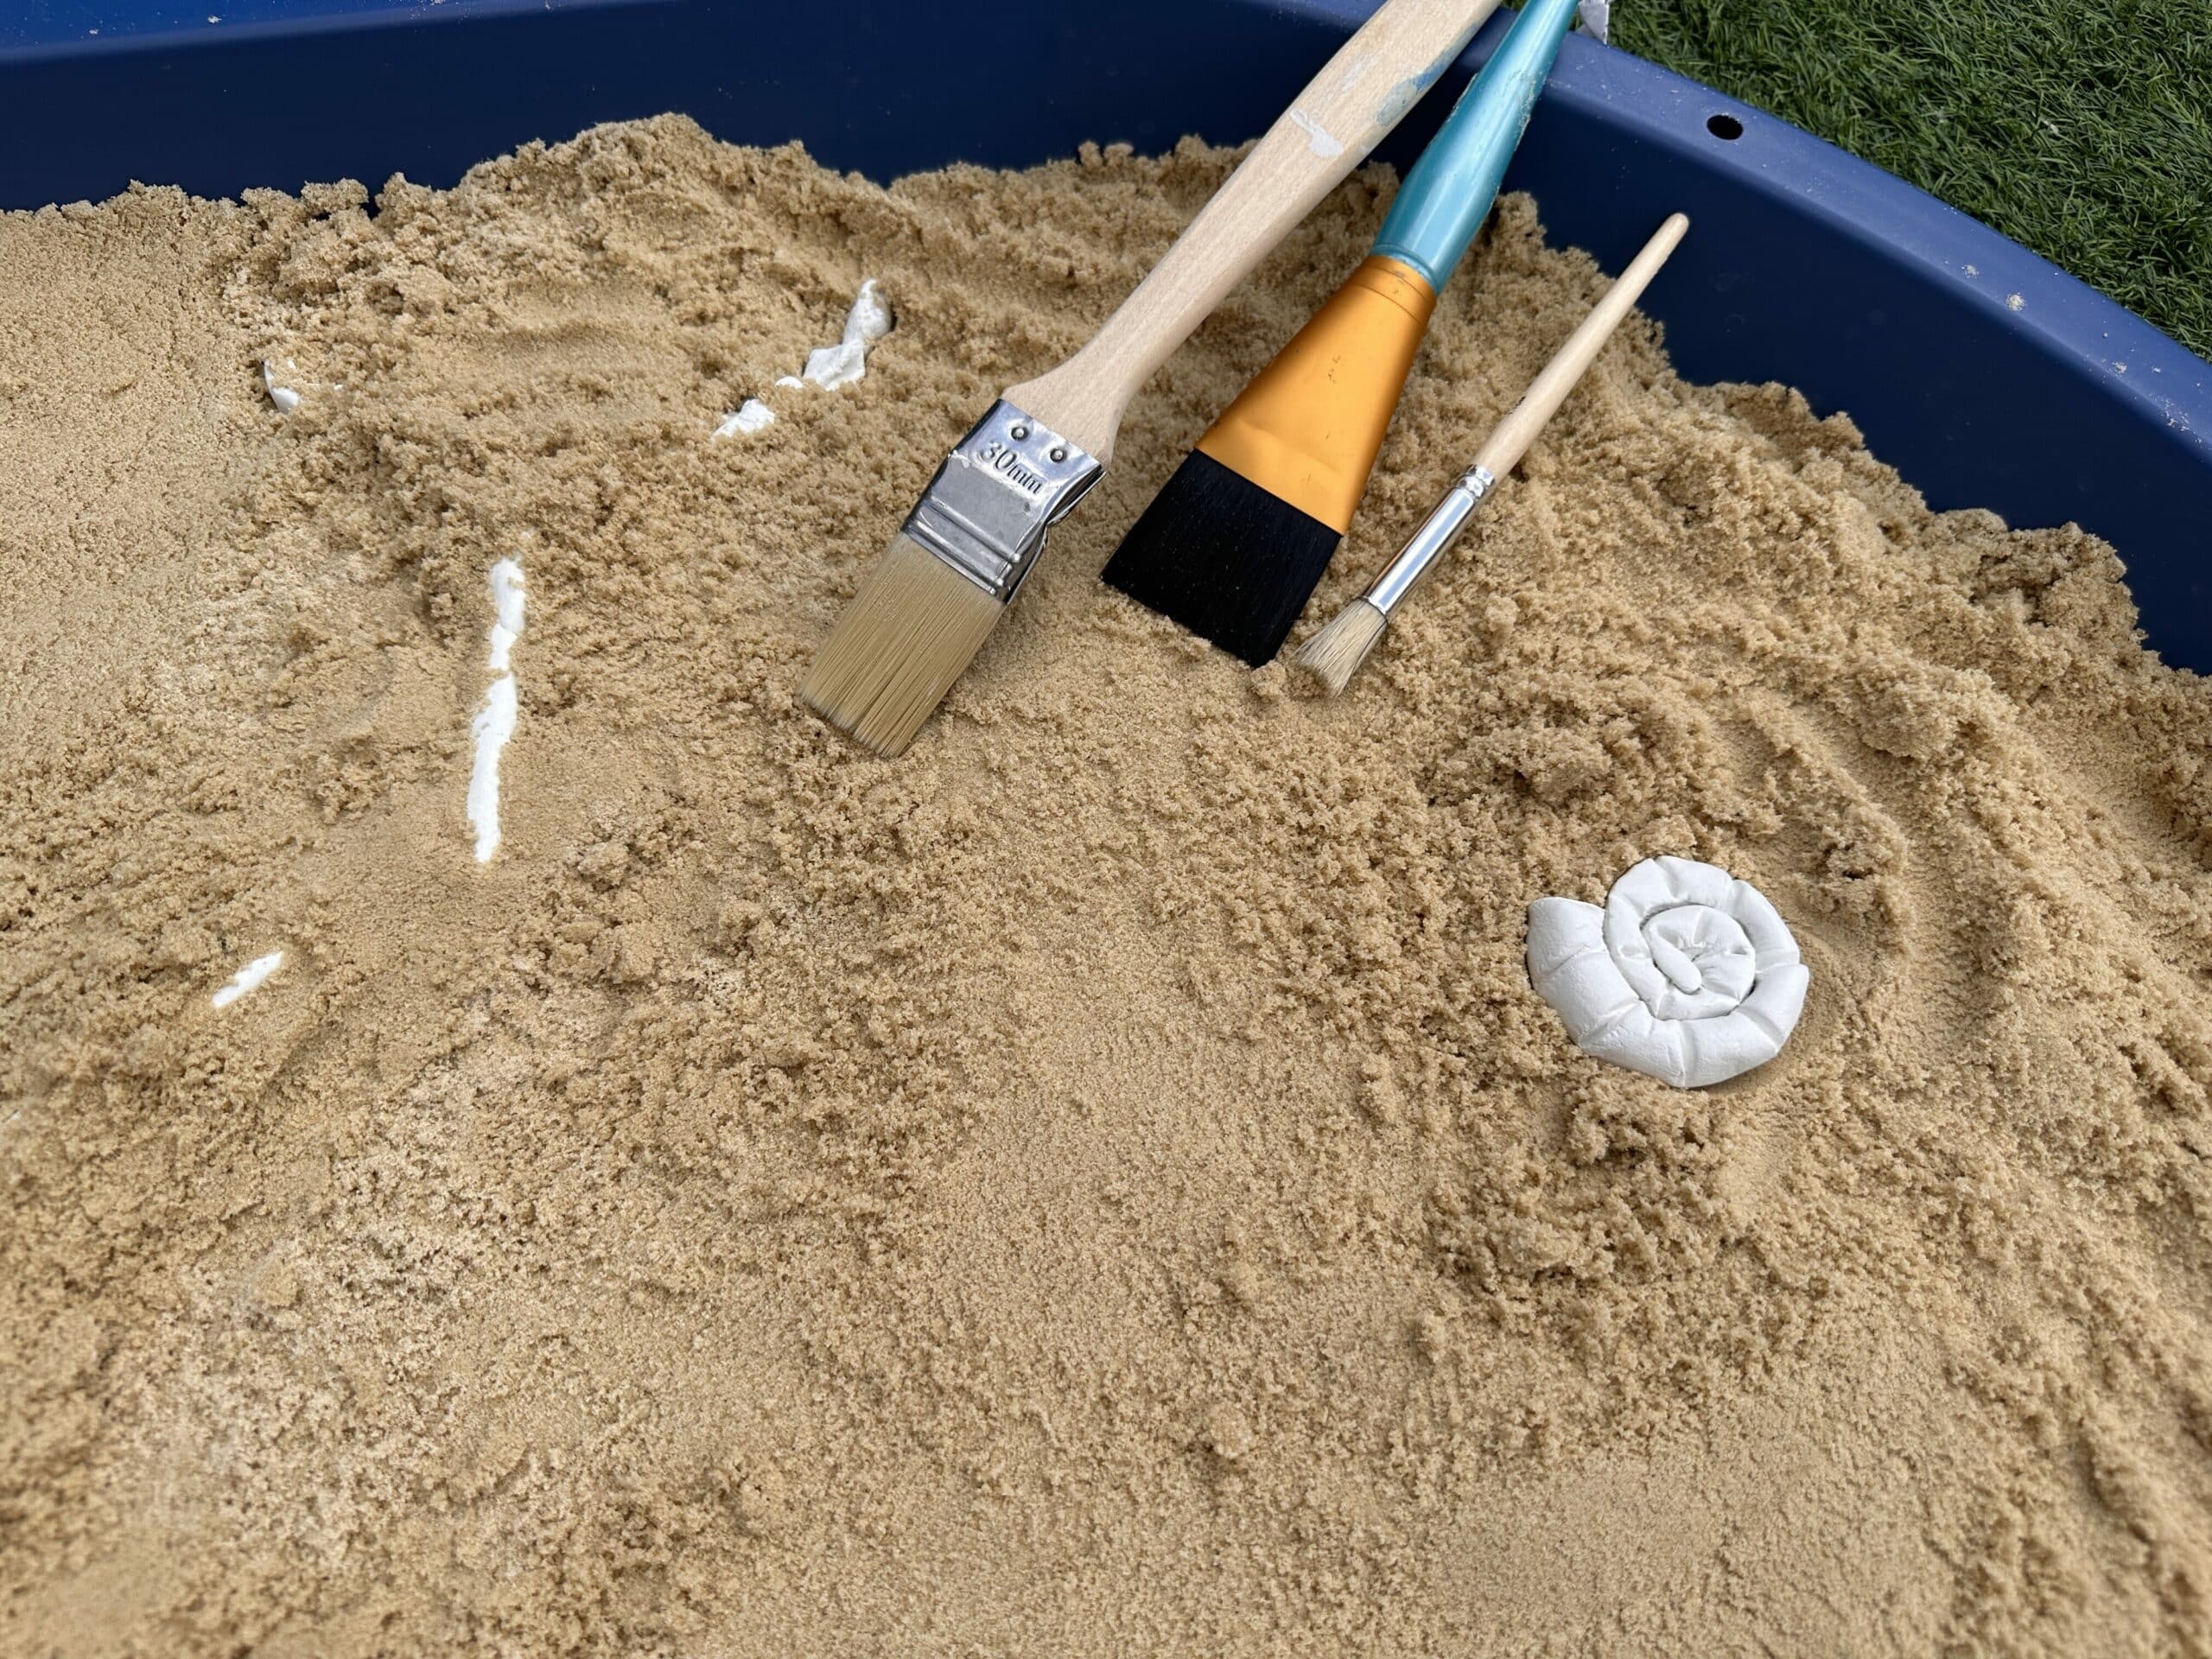 Tray of sand filled with dinosaur bones for a paleontologist activity